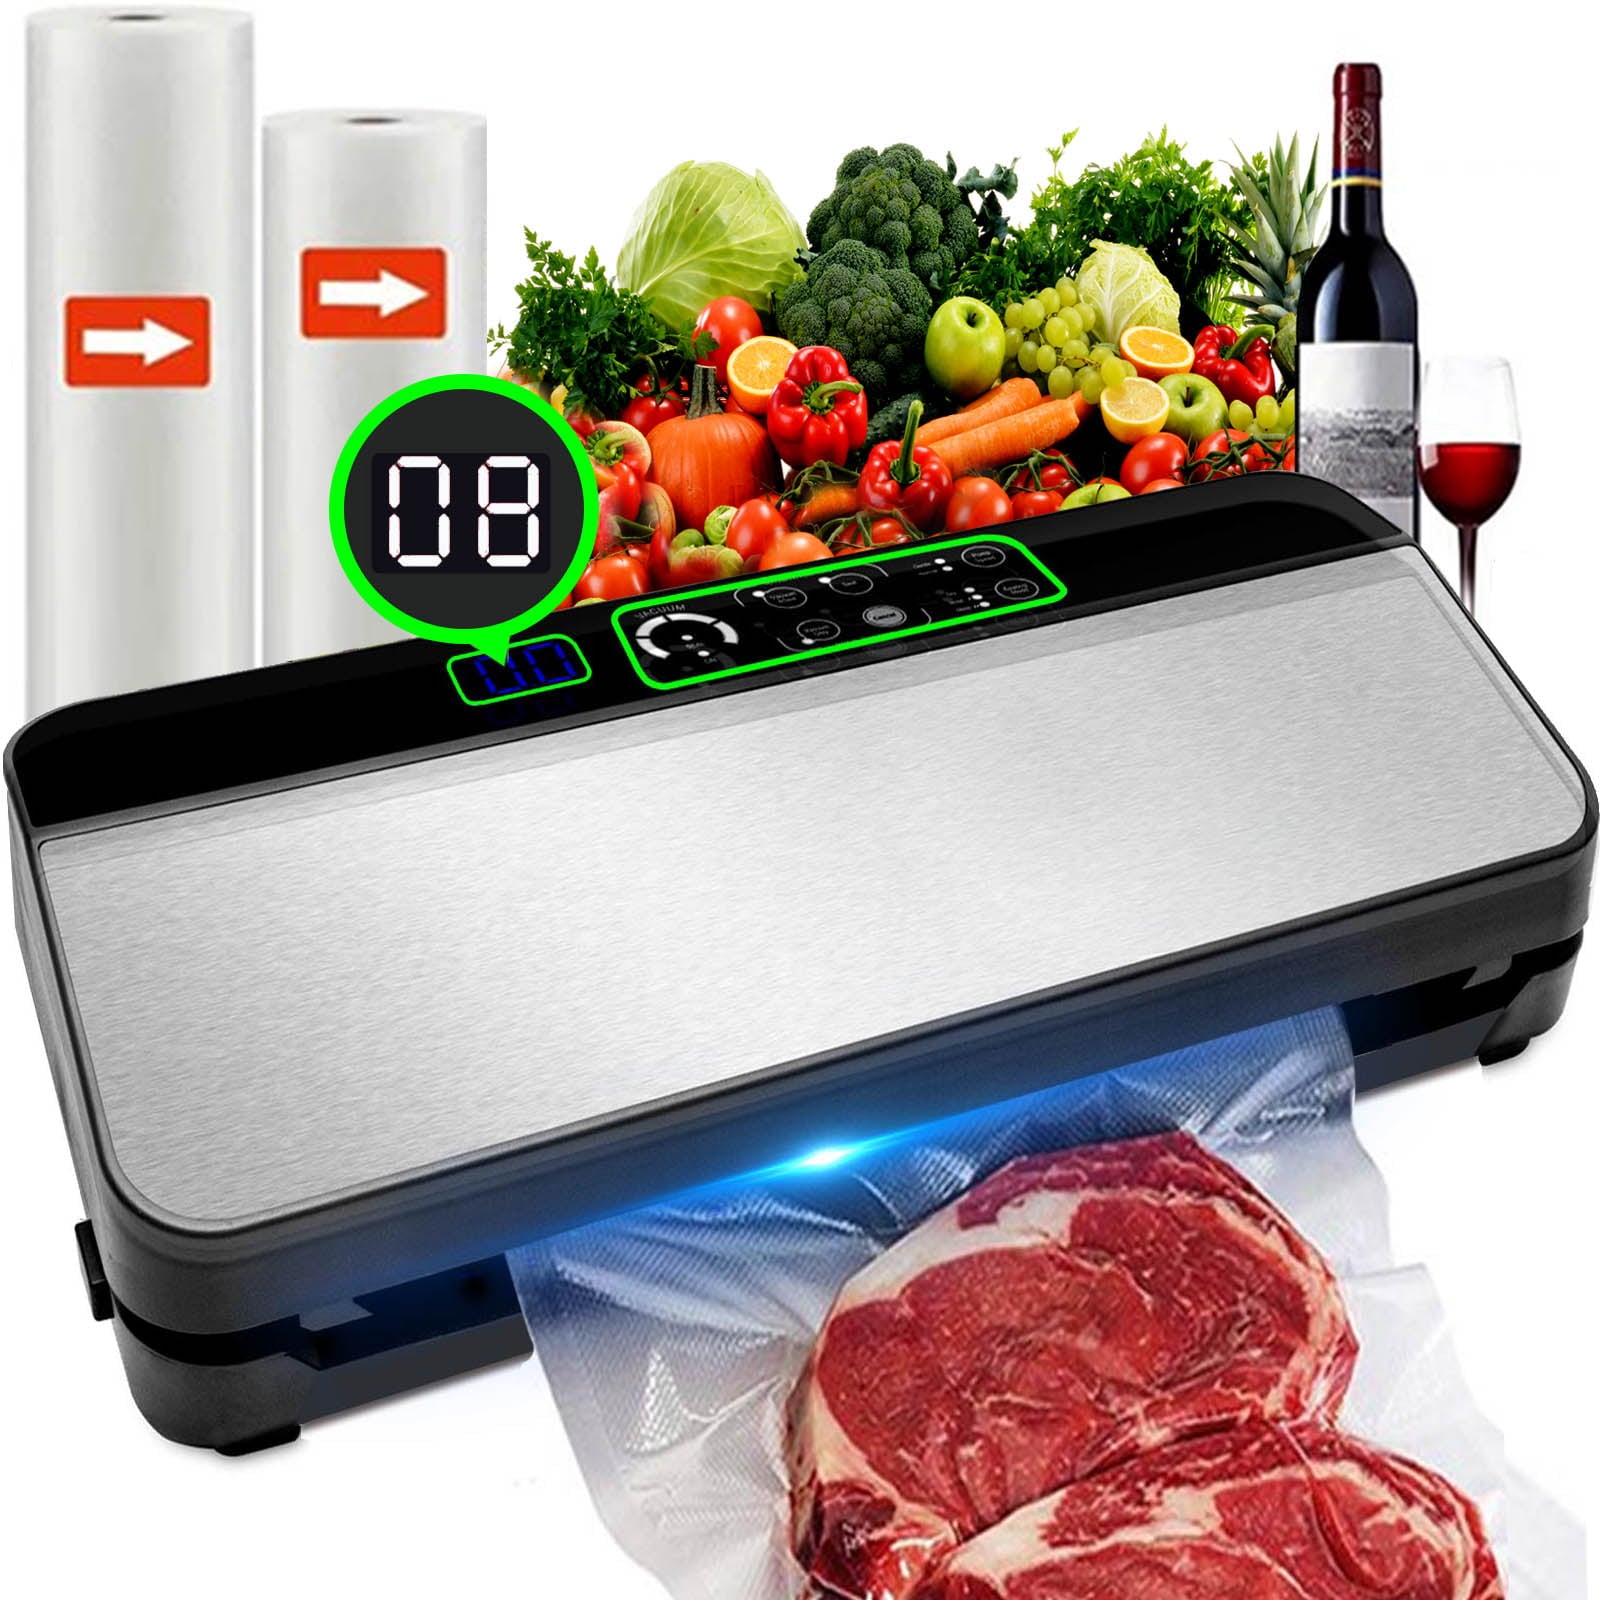 Foodsaver Select Vacuum Sealer With Dry/moist Modes, Roll Storage